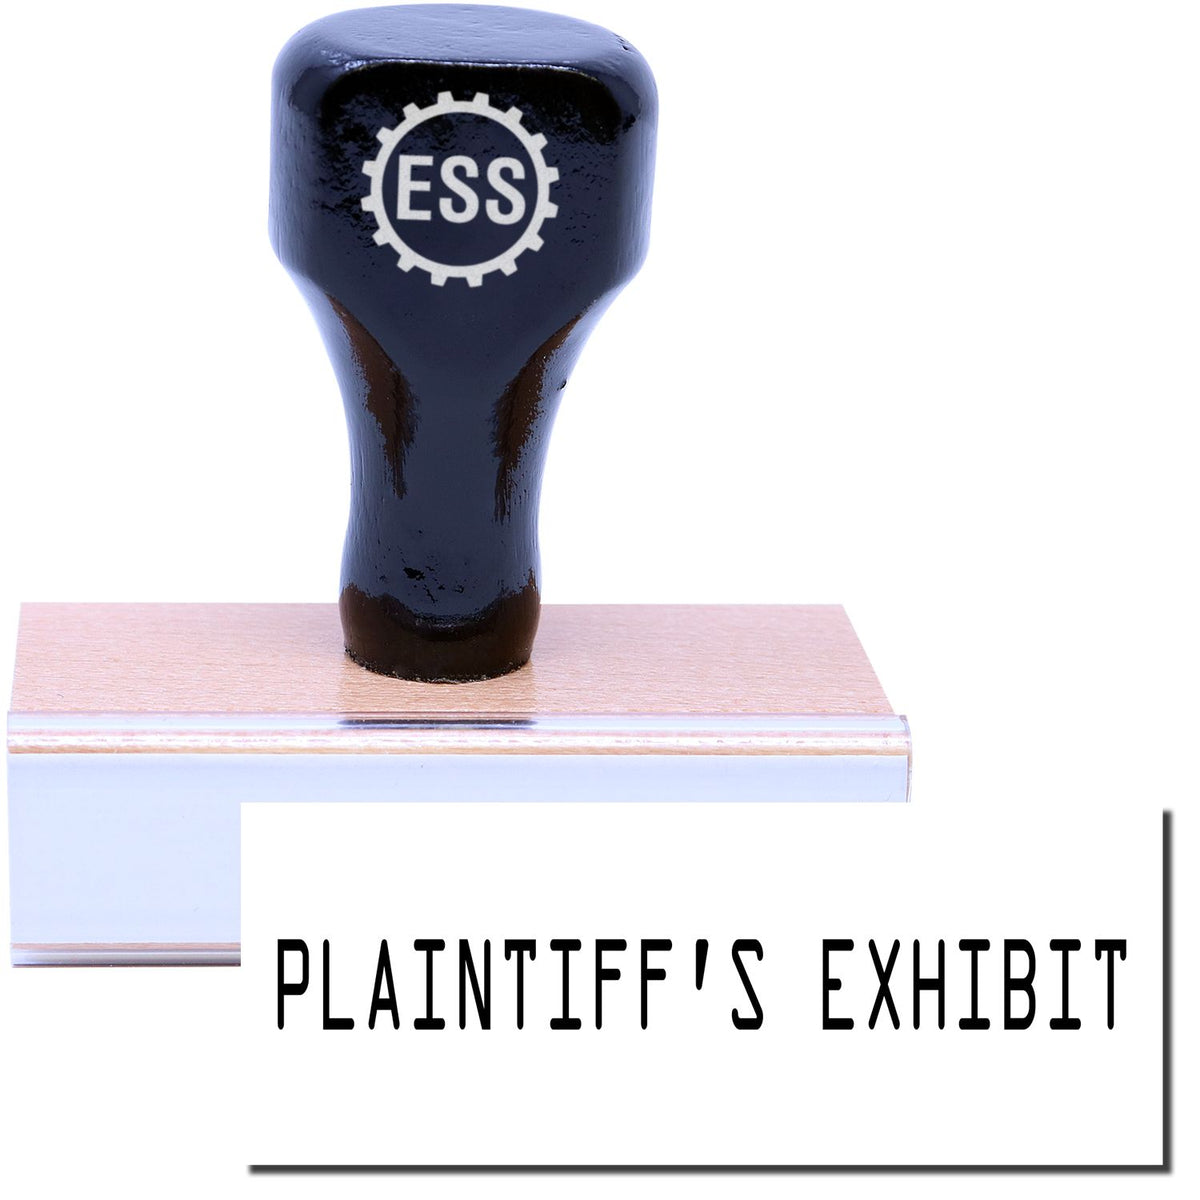 A stock office rubber stamp with a stamped image showing how the text &quot;PLAINTIFF&#39;S EXHIBIT&quot; in a large font is displayed after stamping.